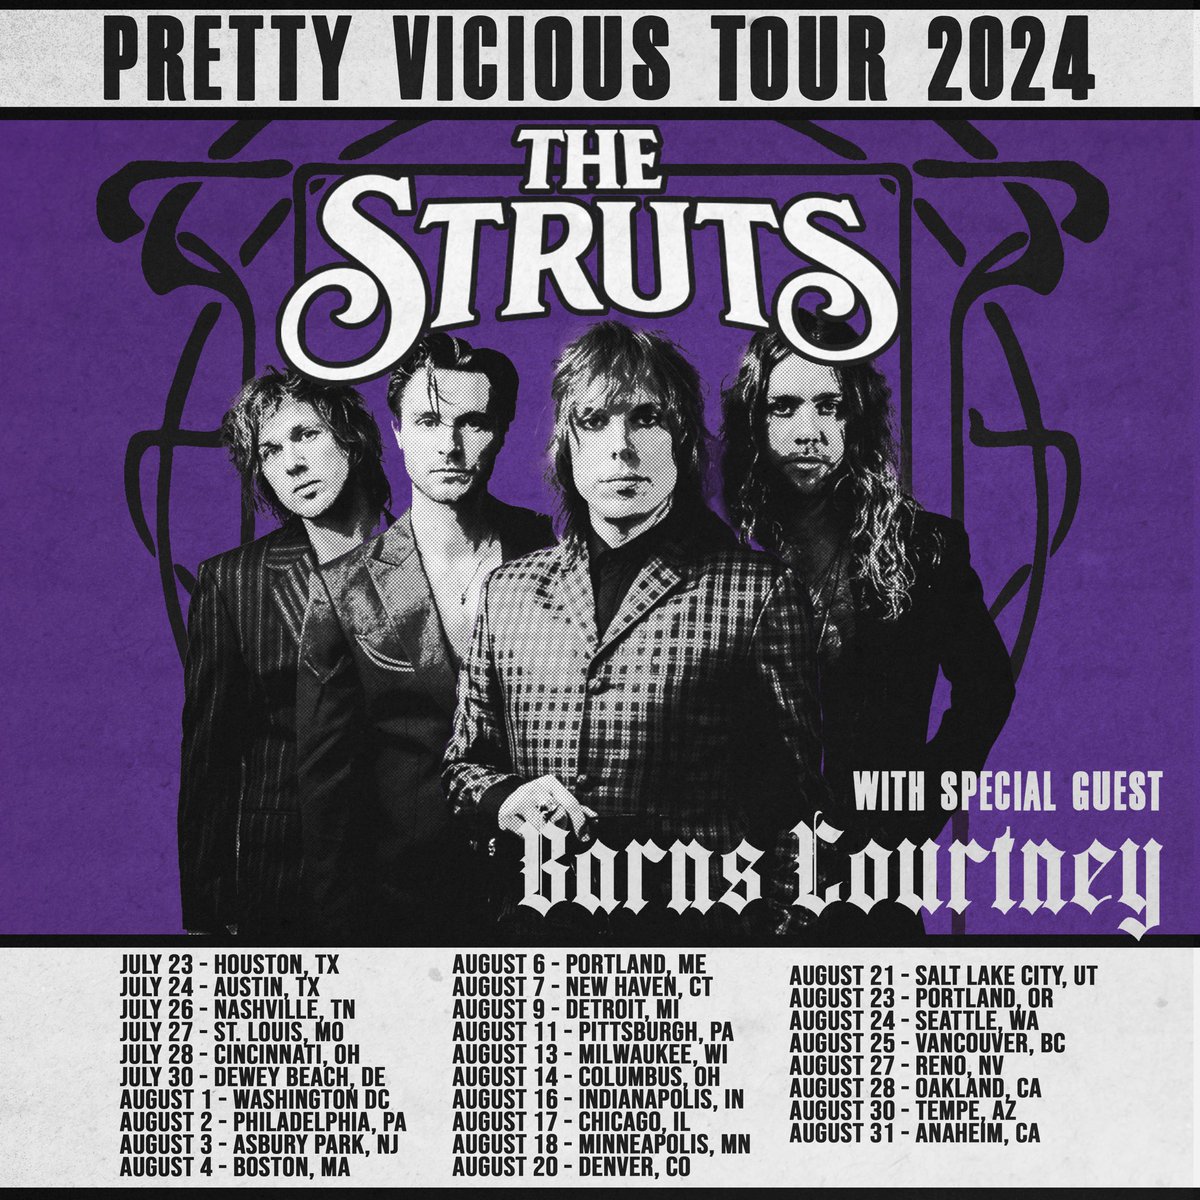 Excited to hit North America with @BarnsCourtney for our Pretty Vicious Tour 2024! 💜 Who’s coming?! Presale starts Tuesday April 9th at 10am local with code PRETTY. All tickets onsale Friday April 12th at 10am local.